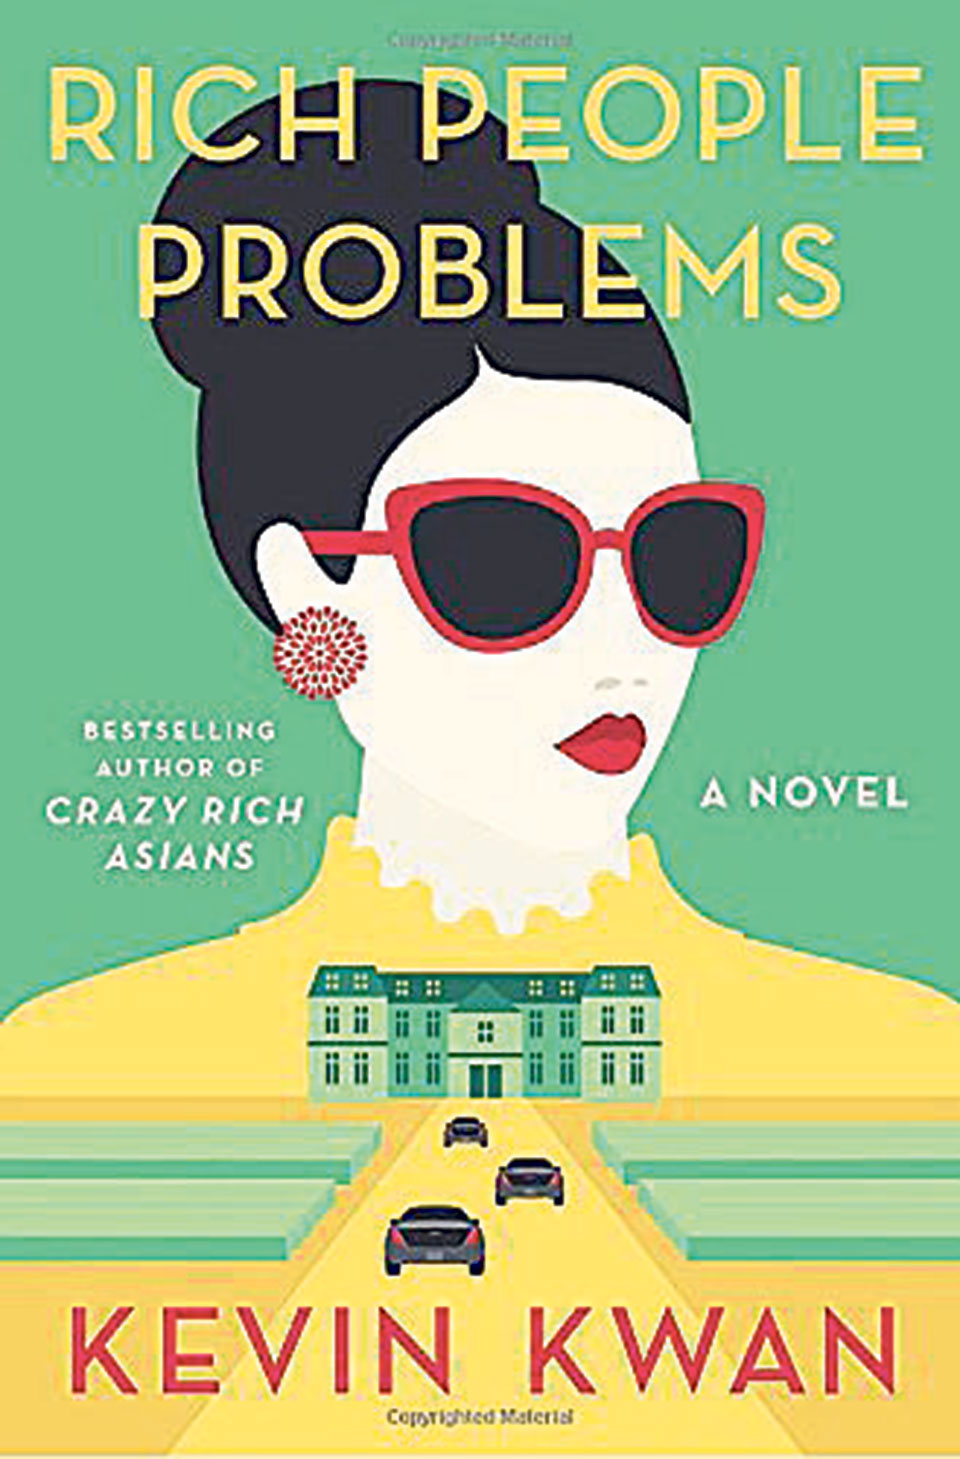 Rich People Problems by Kevin Kwan 
Price: Rs 958